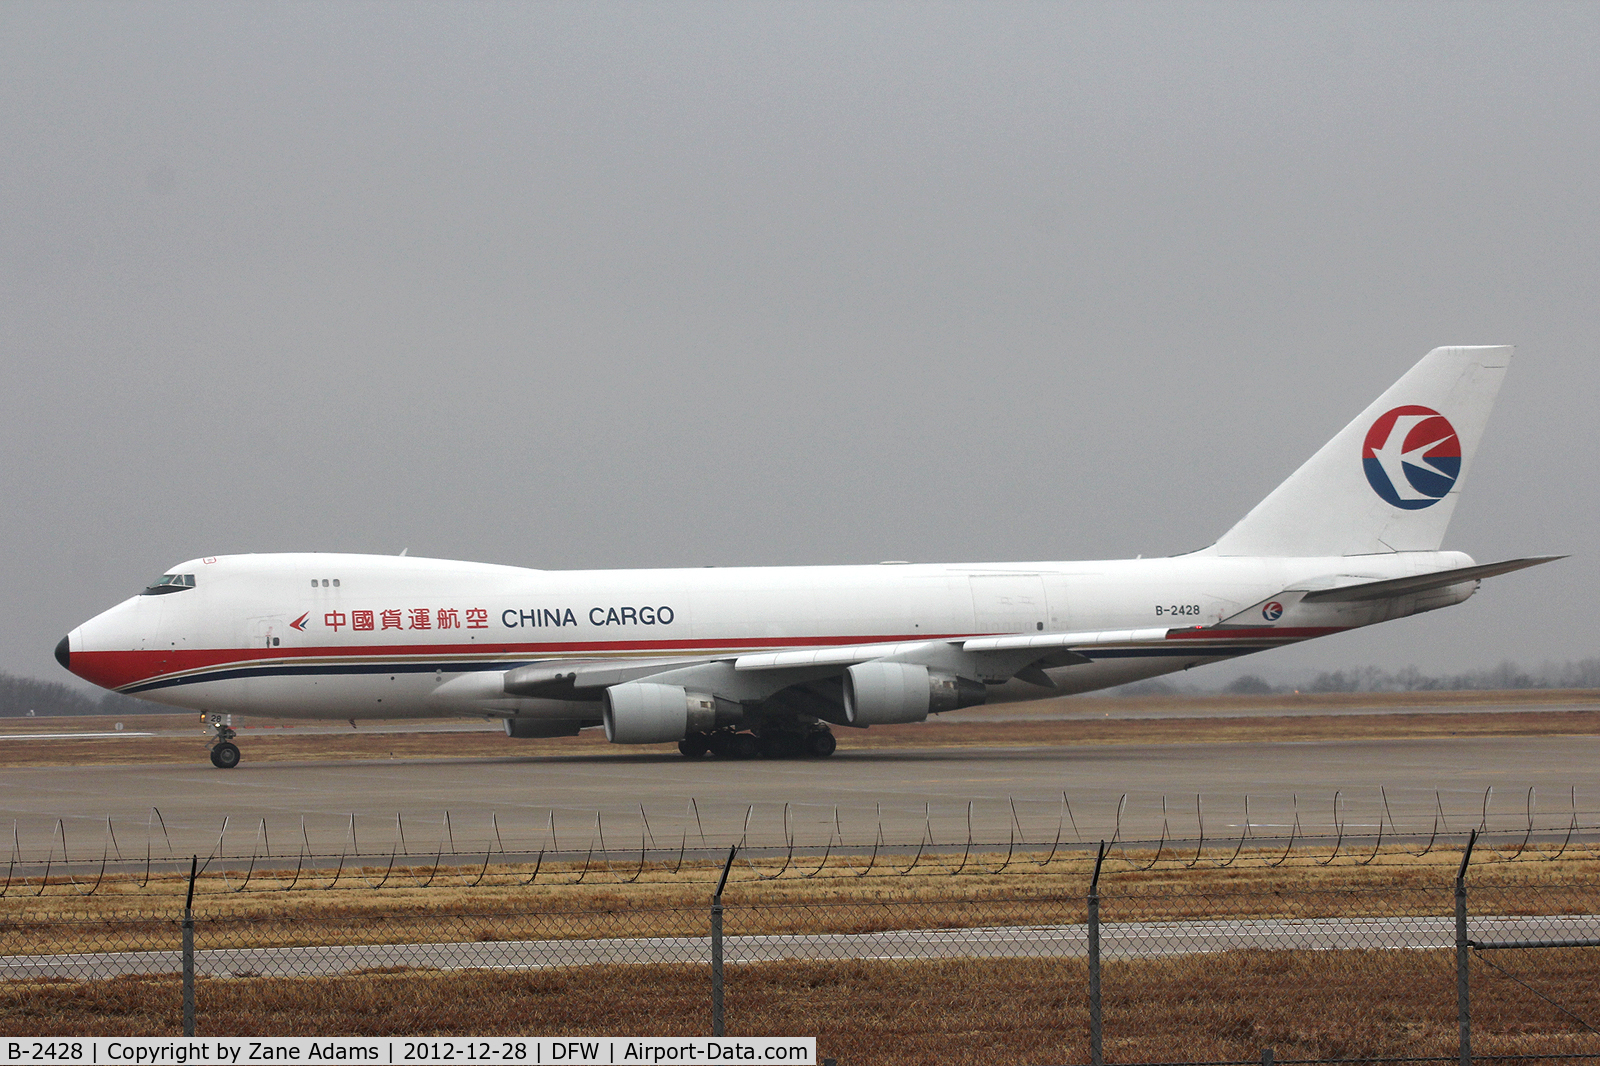 B-2428, 1996 Boeing 747-412F/SCD C/N 28263, China Cargo 747 at DFW Airport